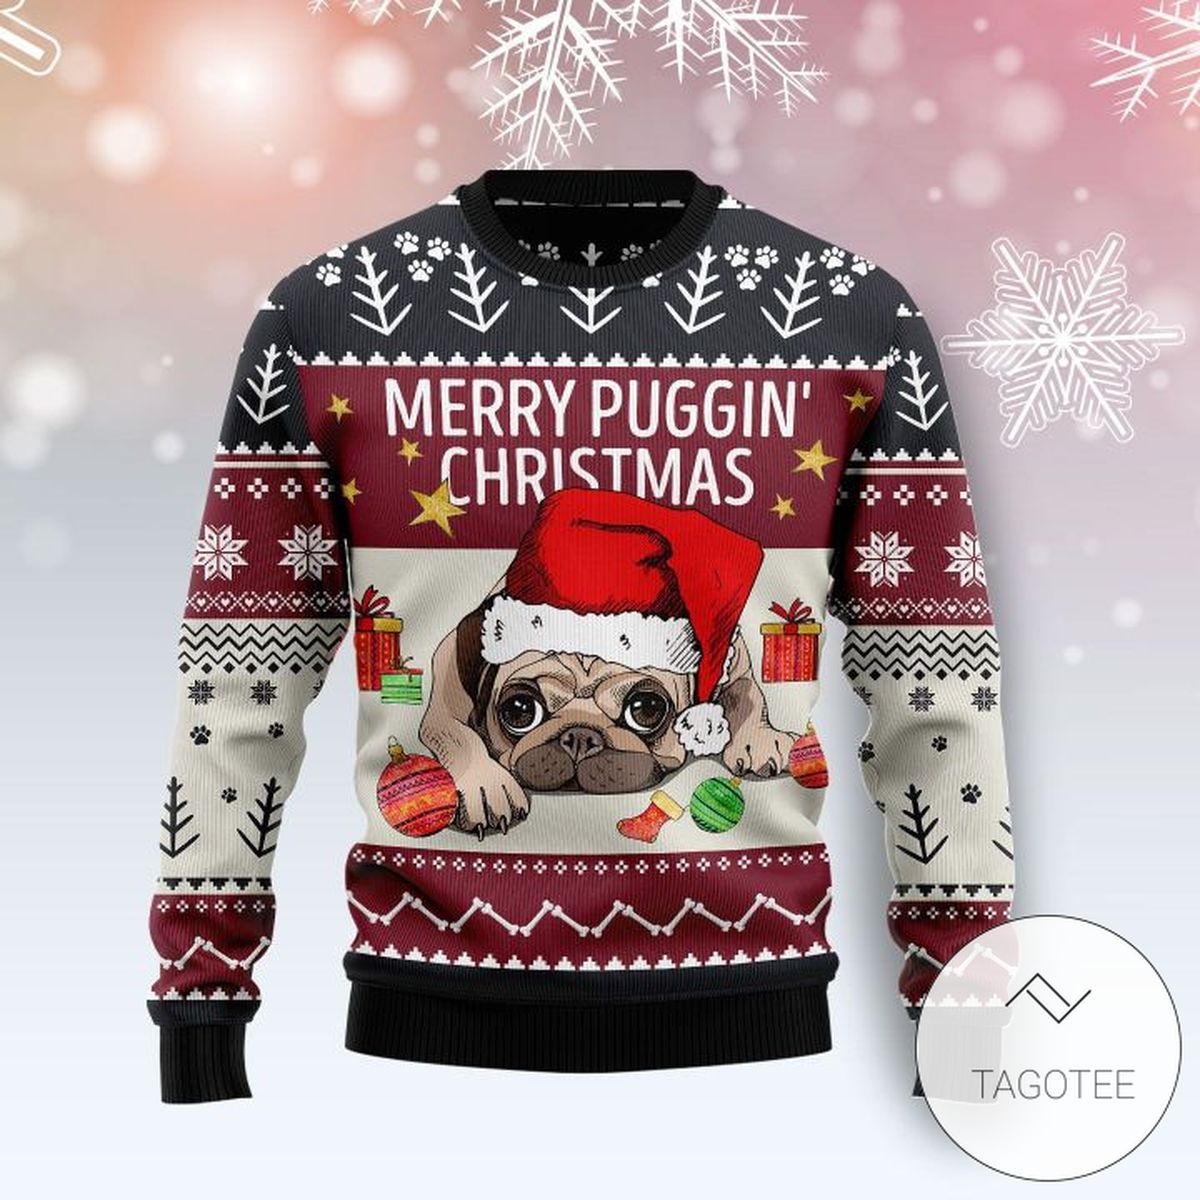 Merry Puggin' Christmas For Unisex Sweatshirt Knitted Ugly Christmas Sweater